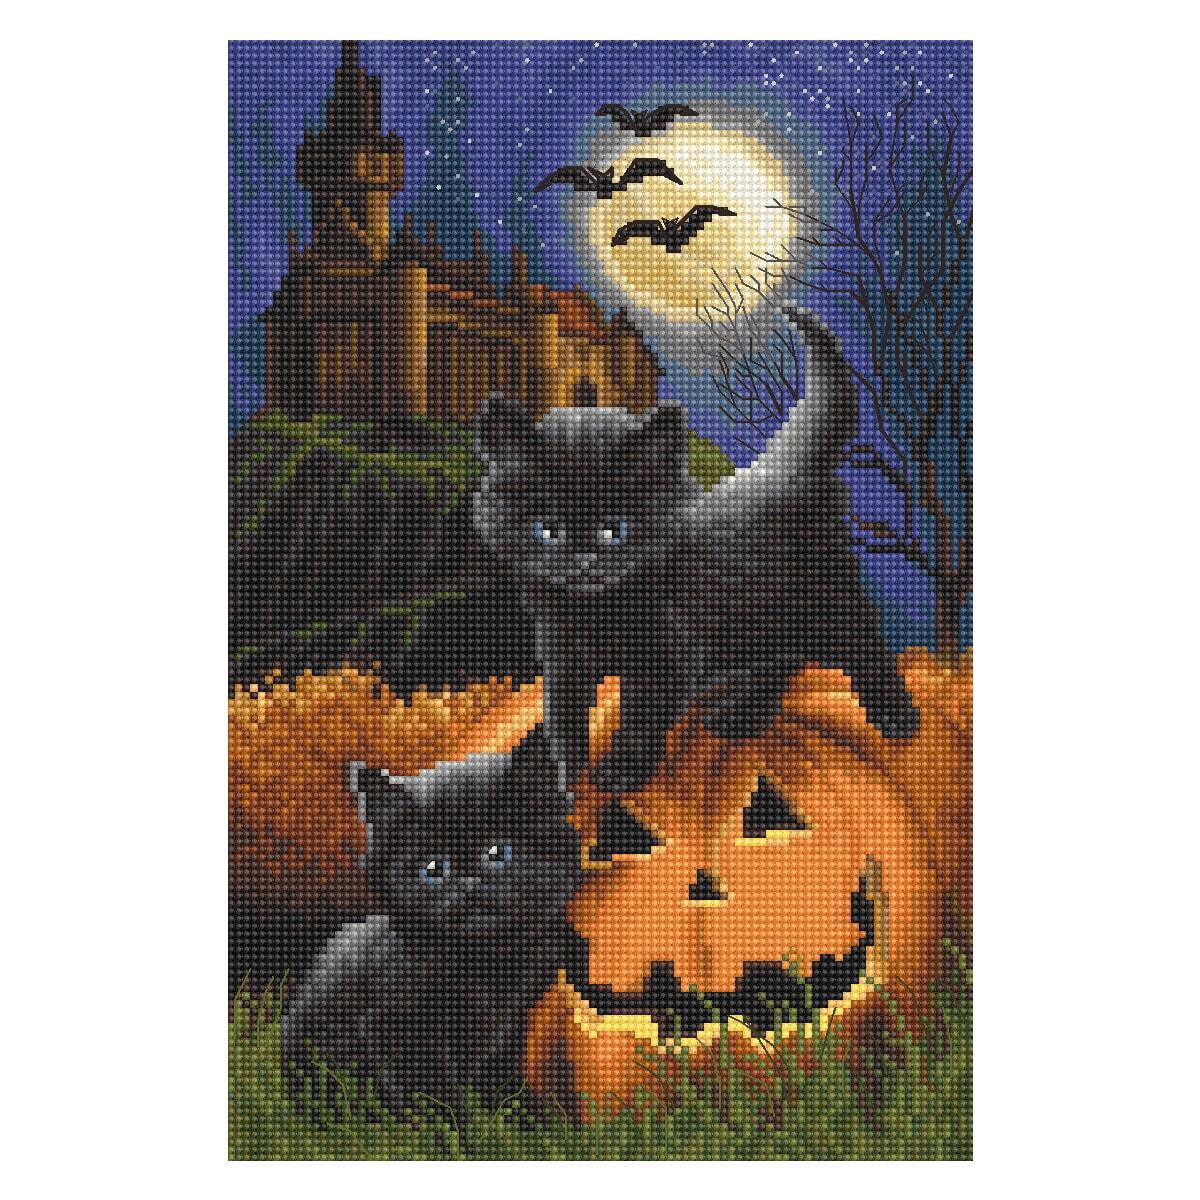 Two black kittens with bright blue eyes play on a carved...